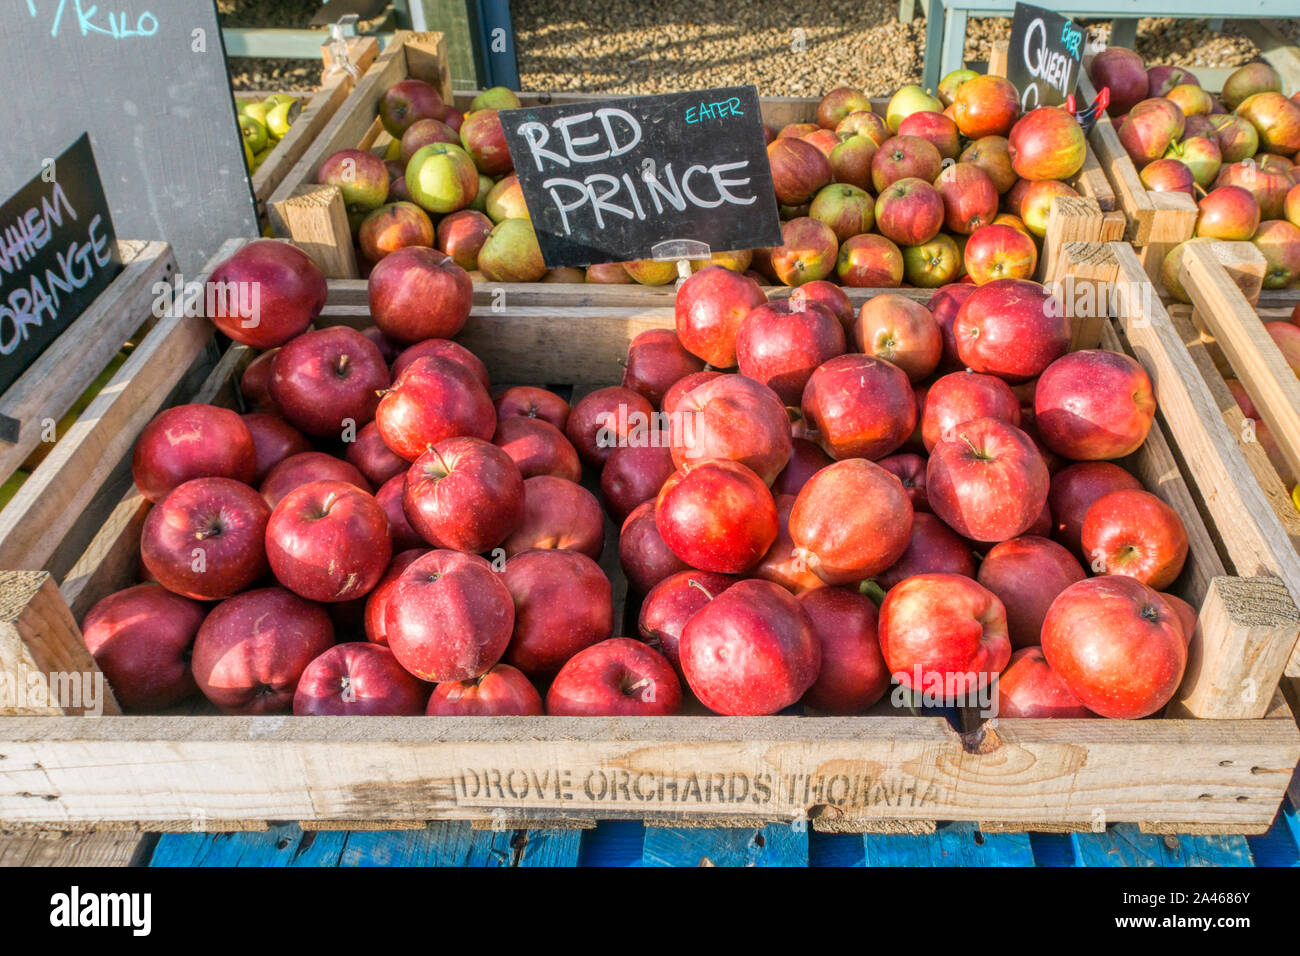 Box of red prince eating apples for sale at a Norfolk farm shop. Stock Photo